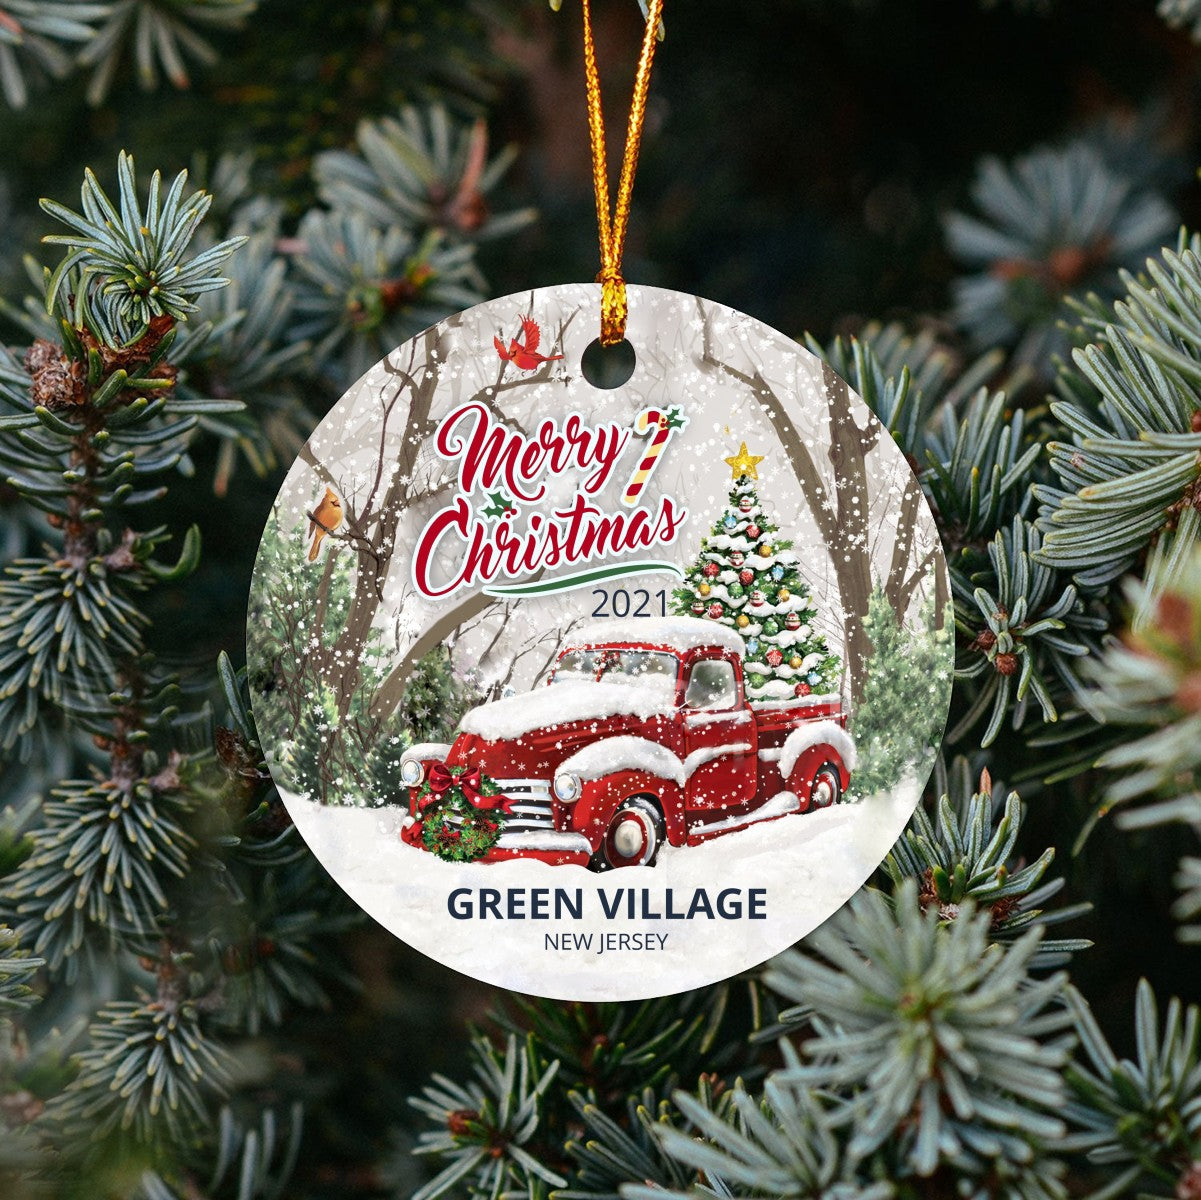 Christmas Tree Ornaments Green Village - Ornament With Name City, State Green Village New Jersey NJ Ornament - Red Truck Xmas Ornaments 3'' Plastic Gift For Family, Friend And Housewarming